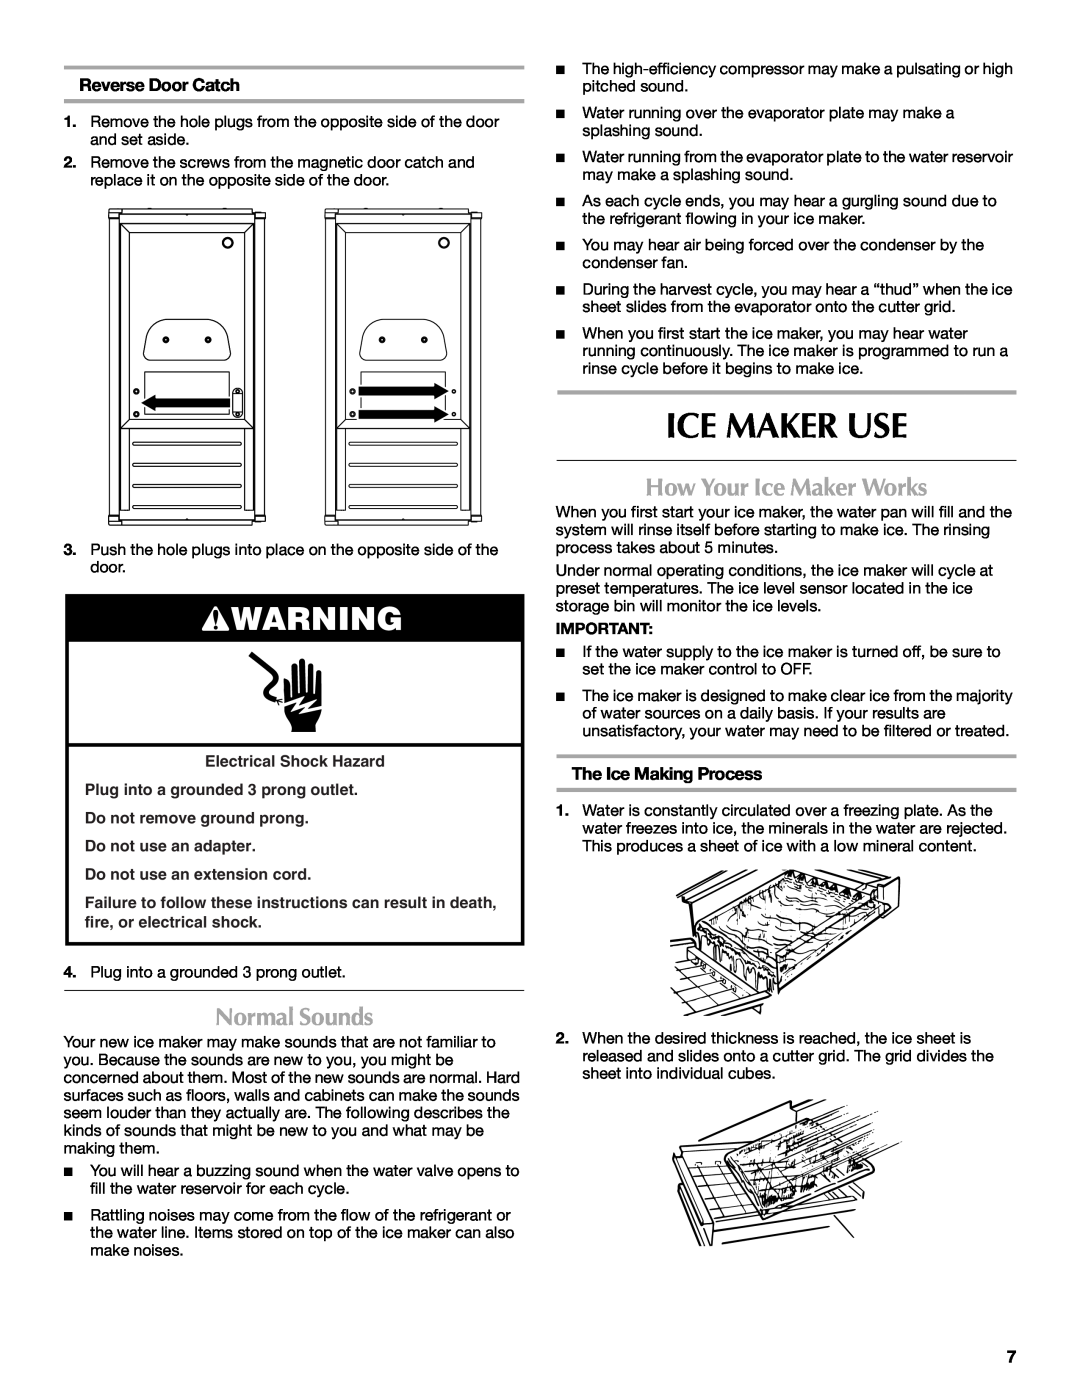 Maytag W10206488B Ice Maker Use, Normal Sounds, How Your Ice Maker Works, Reverse Door Catch, The Ice Making Process 